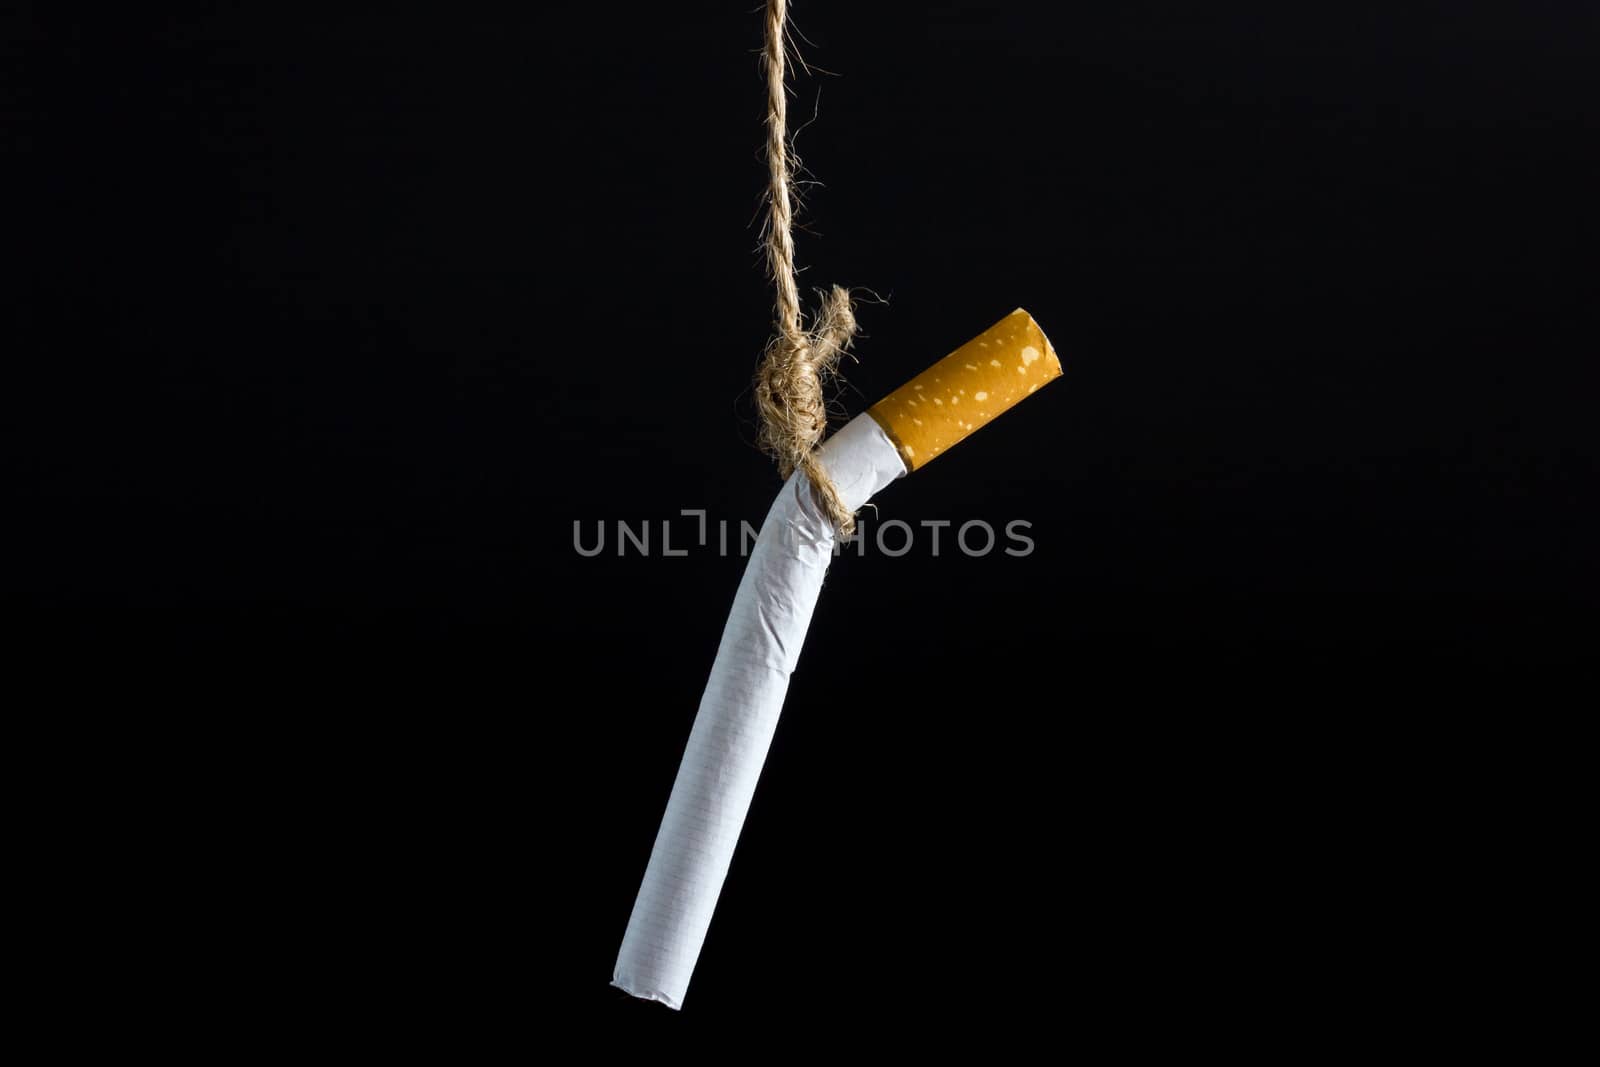 Anti Tobacco, Cigarette was hanged with a rope on dark background.